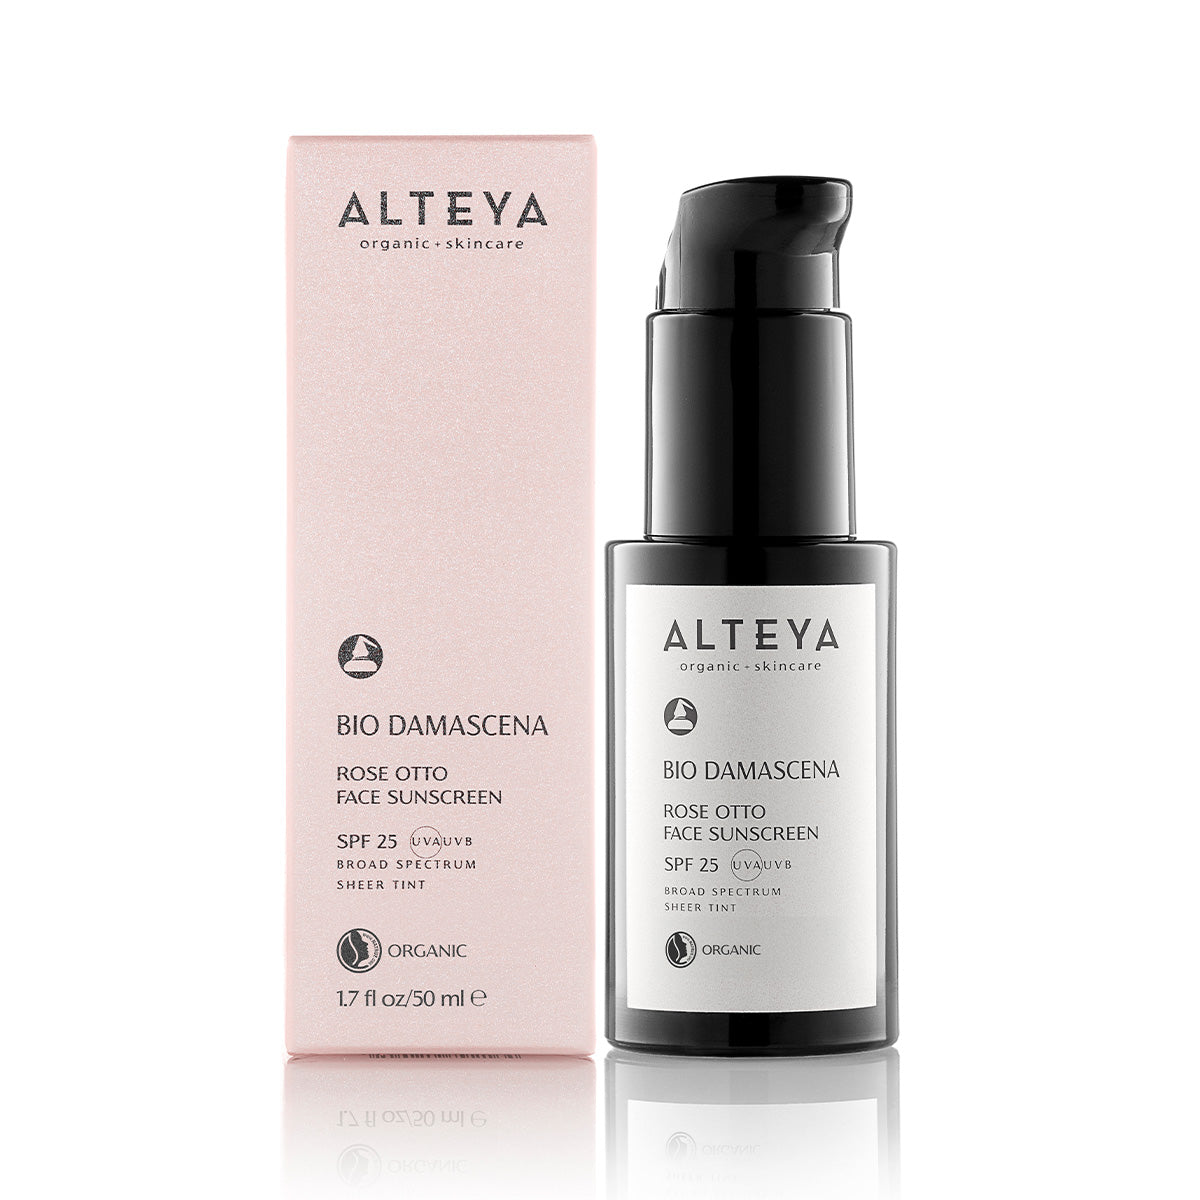 Skin-Care-Organic-Rose-Otto-Face-Sunscreen-Cream-Bio-Damascena-SPF25-Alteya-Organics - A potent extract of Crystalized Tears of Chios supports youthful, radiant complexion and reduces the appearance of fine lines and wrinkles, while Acai and Sea buckthorn extracts offer a rich source of antioxidants to protect and soothe skin, leaving it moist and glowing. The unique mineral sunscreen formula is suitable for everyday use and can be worn under makeup.